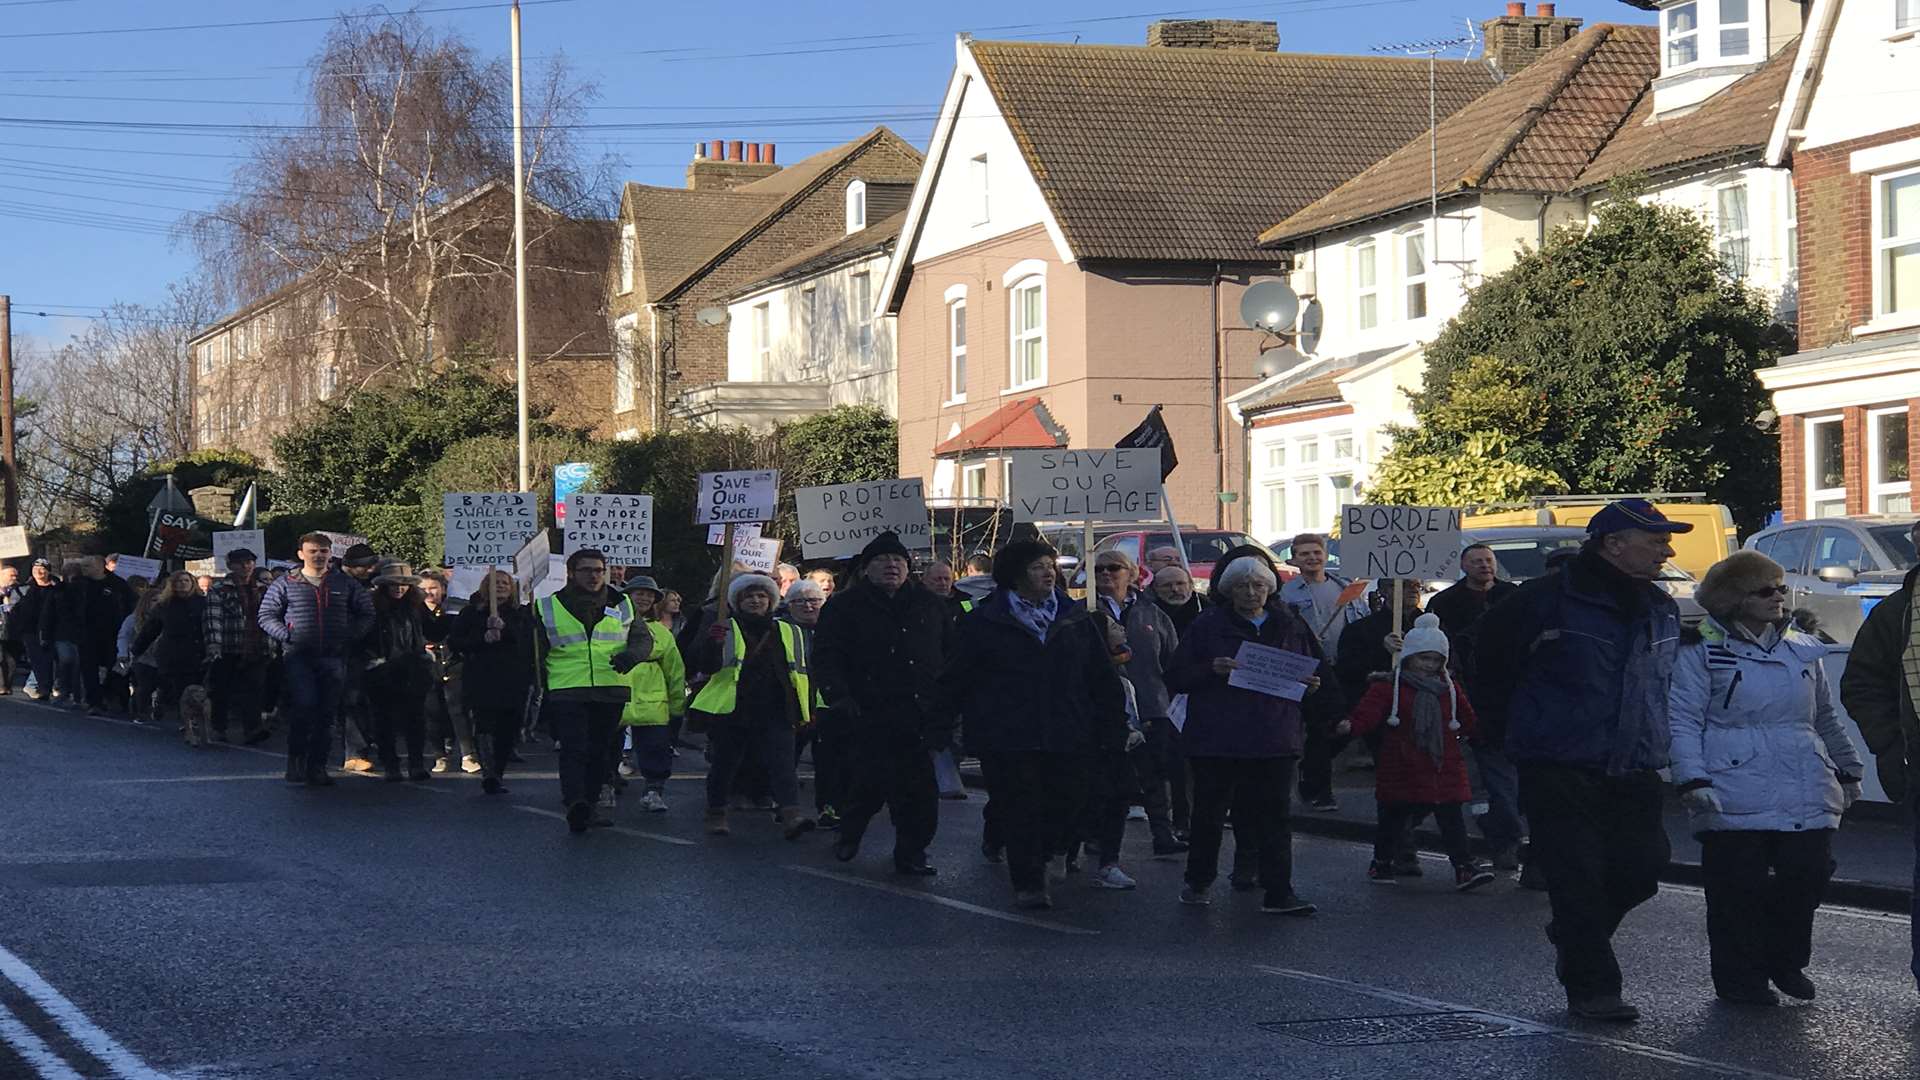 The Borden Residents Against Development protest march in Sittingbourne